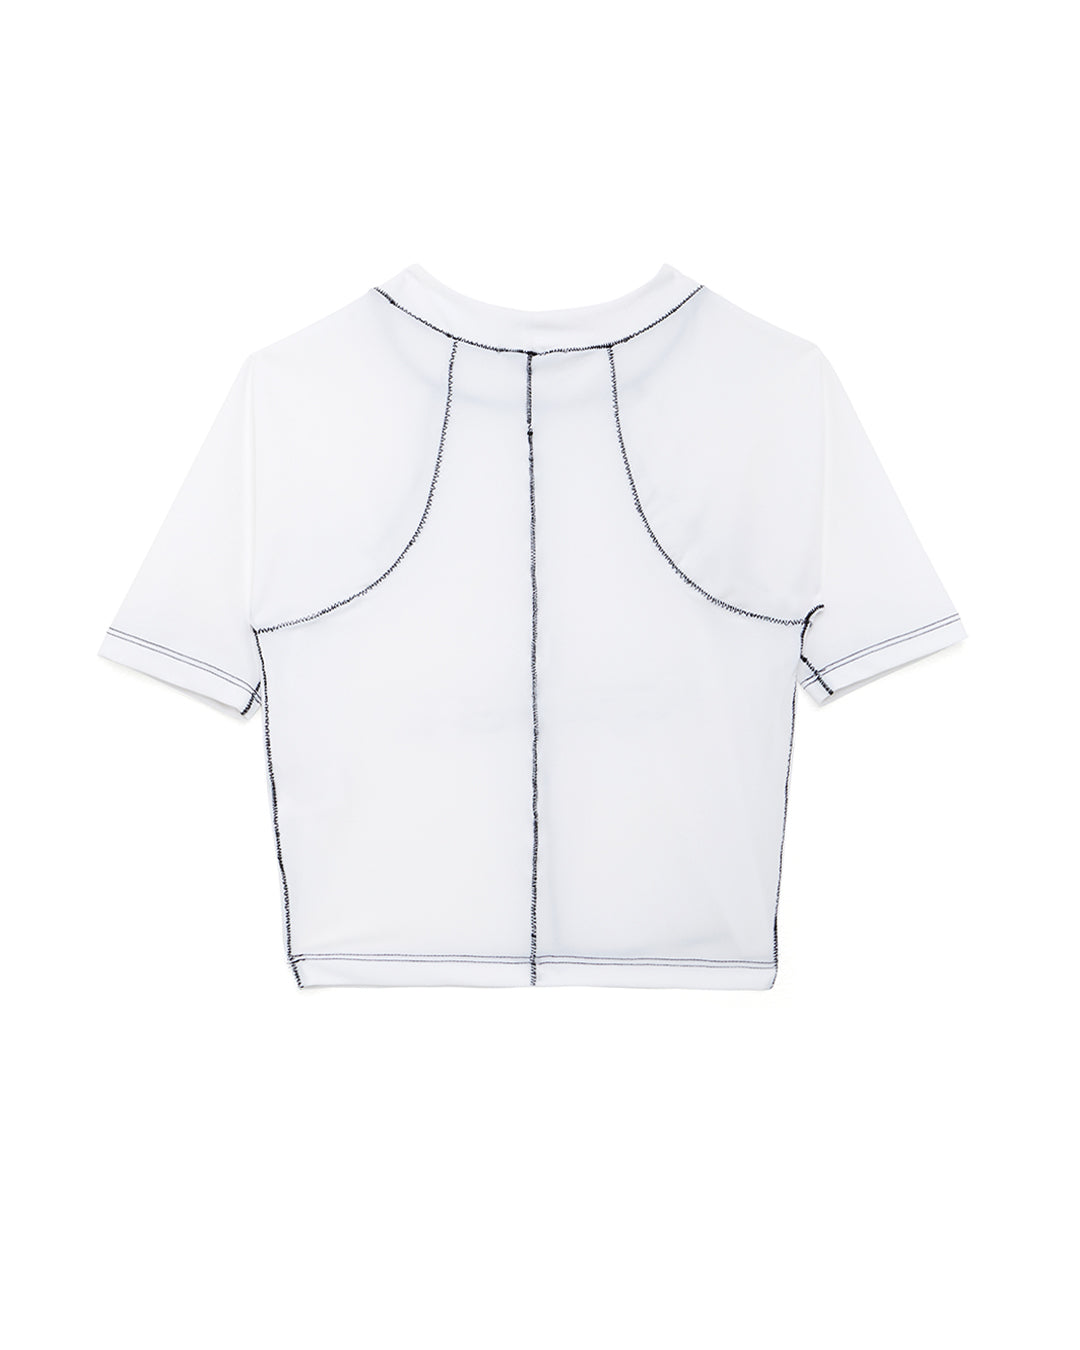 BRB - Fitness Top White